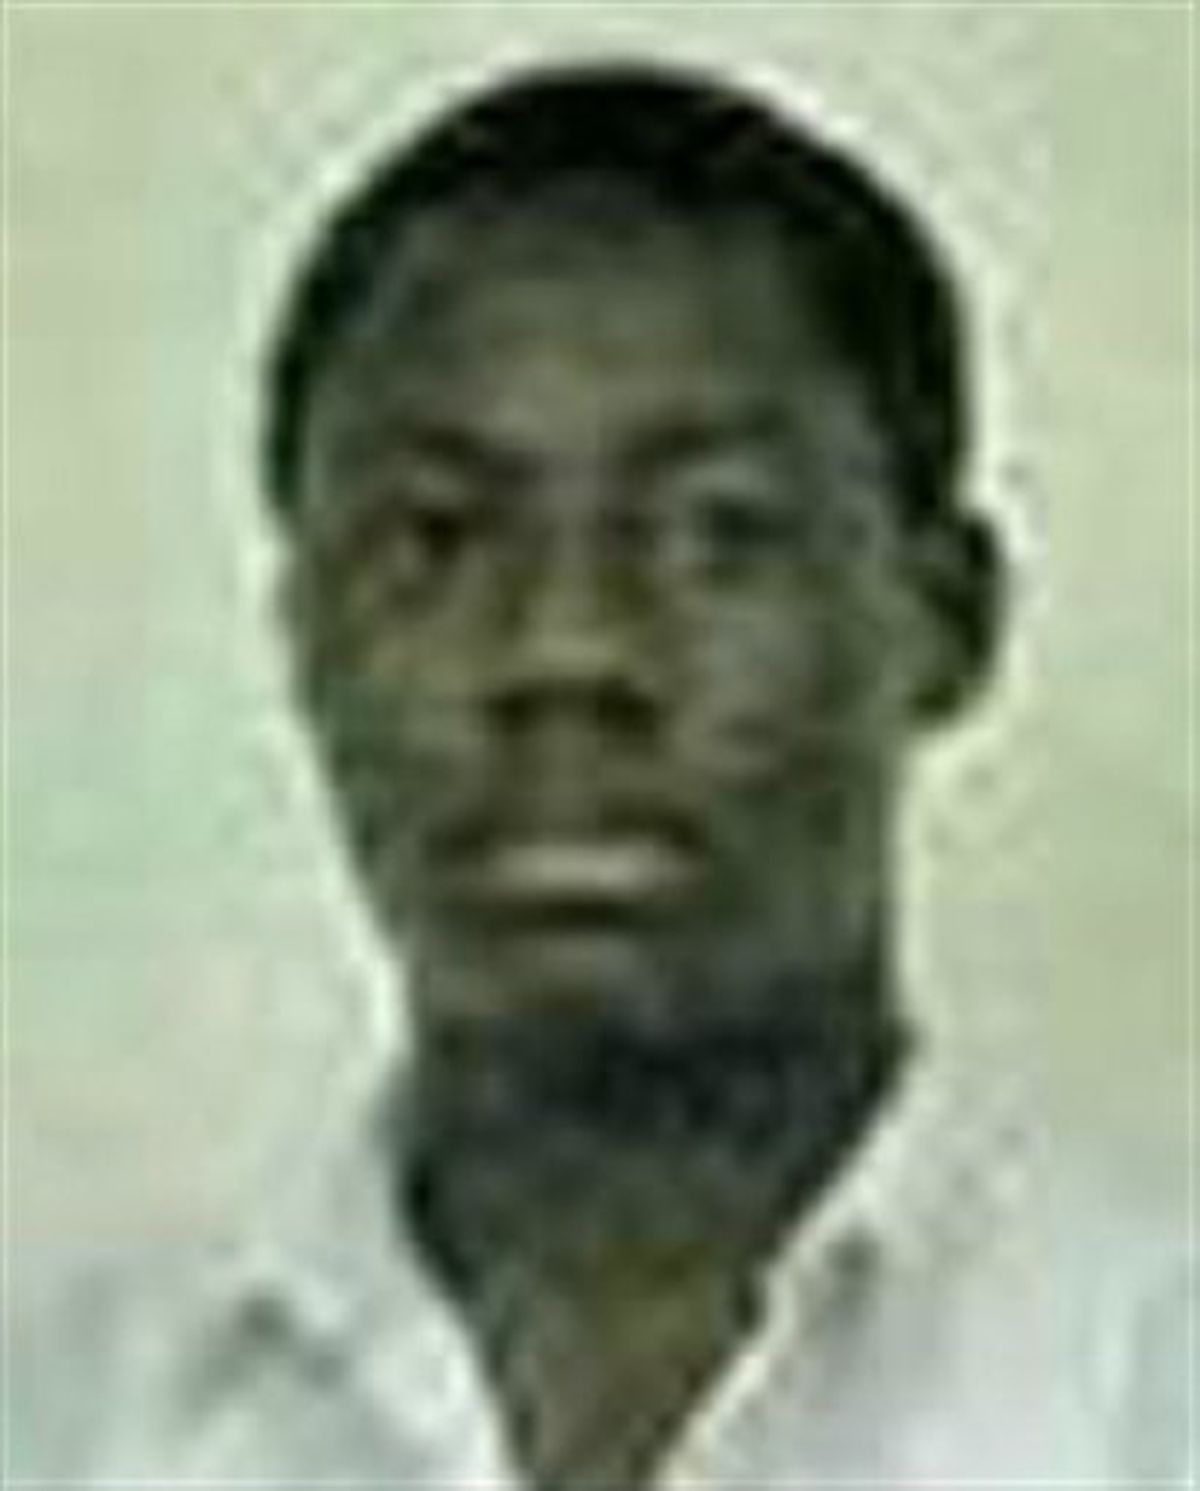 In this undated photo provided by the Web site saharareporters.com and verified by an Associated Press reporter present at the subject's arraignment, Umar Farouk Abdulmutallab is shown. Abdulmutallab, who claimed ties to al-Qaida, was charged Saturday, Dec. 26, 2009 with trying to destroy a Detroit-bound airliner, just a month after his father warned U.S. officials of concerns about his son's religious beliefs. (AP Photo/saharareporters.com) NO SALES (AP)